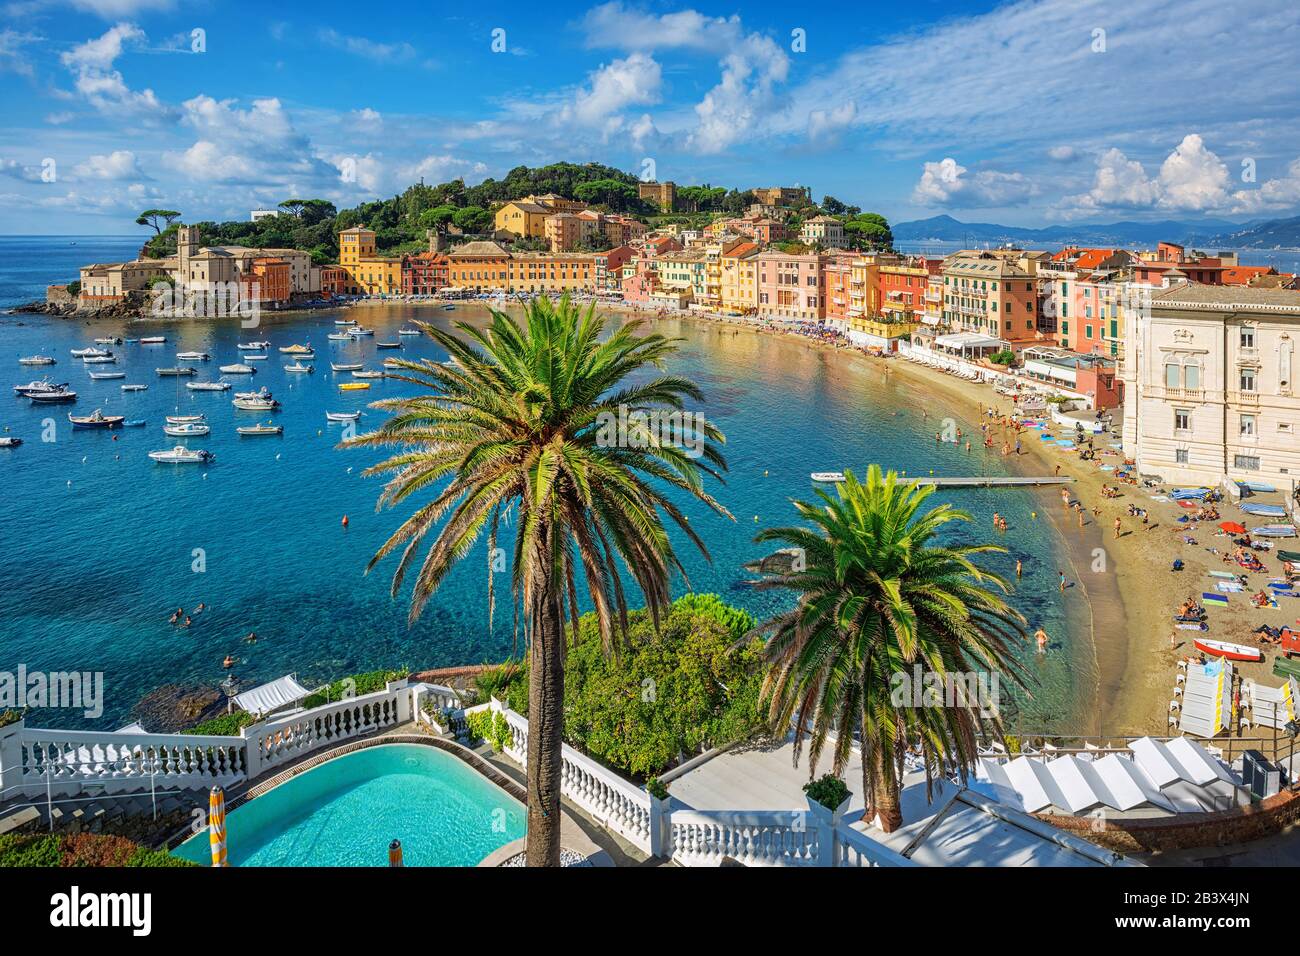 Bay of Silence in Sestri Levante, Italy. Sestri Levante is a popular resort town in Liguria, situated on a peninsula on italian Mediterranean sea coas Stock Photo